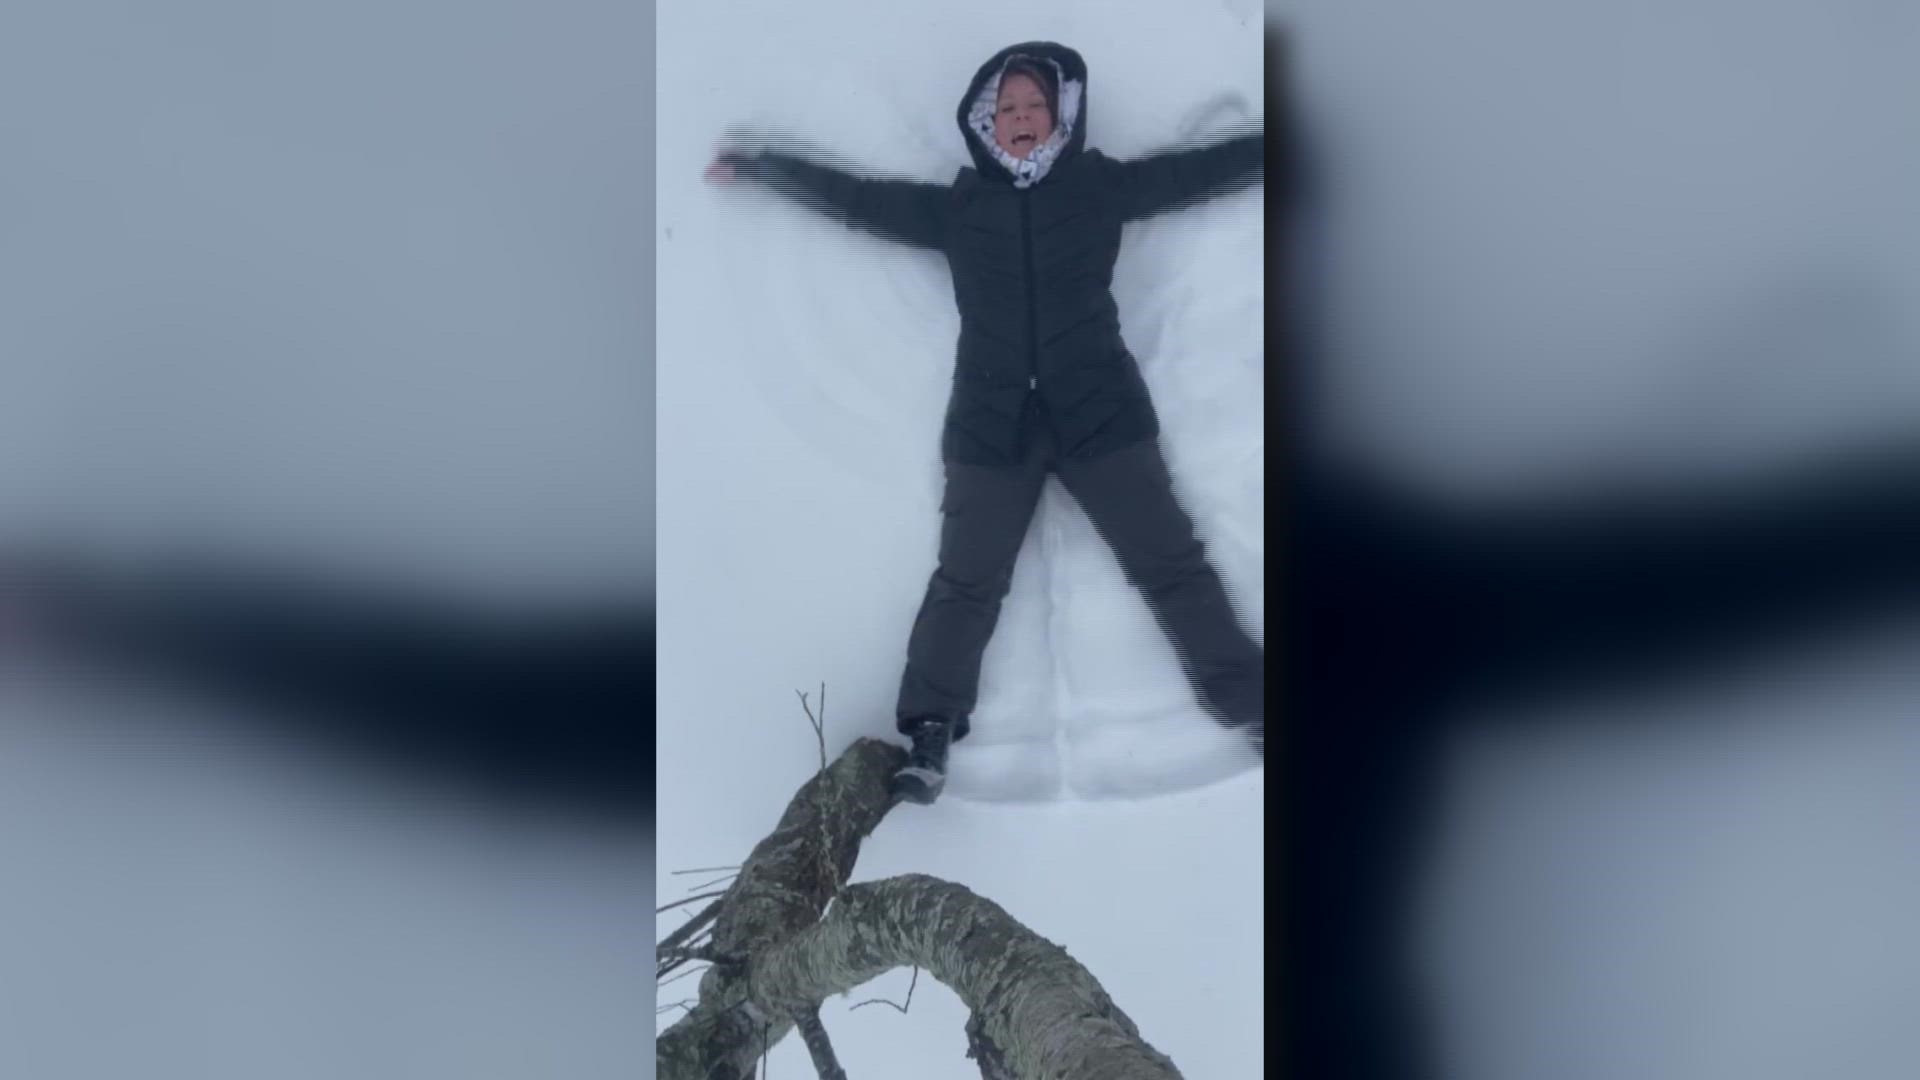 WFMY News 2's Tanya Rivera lives it up on a snow day!